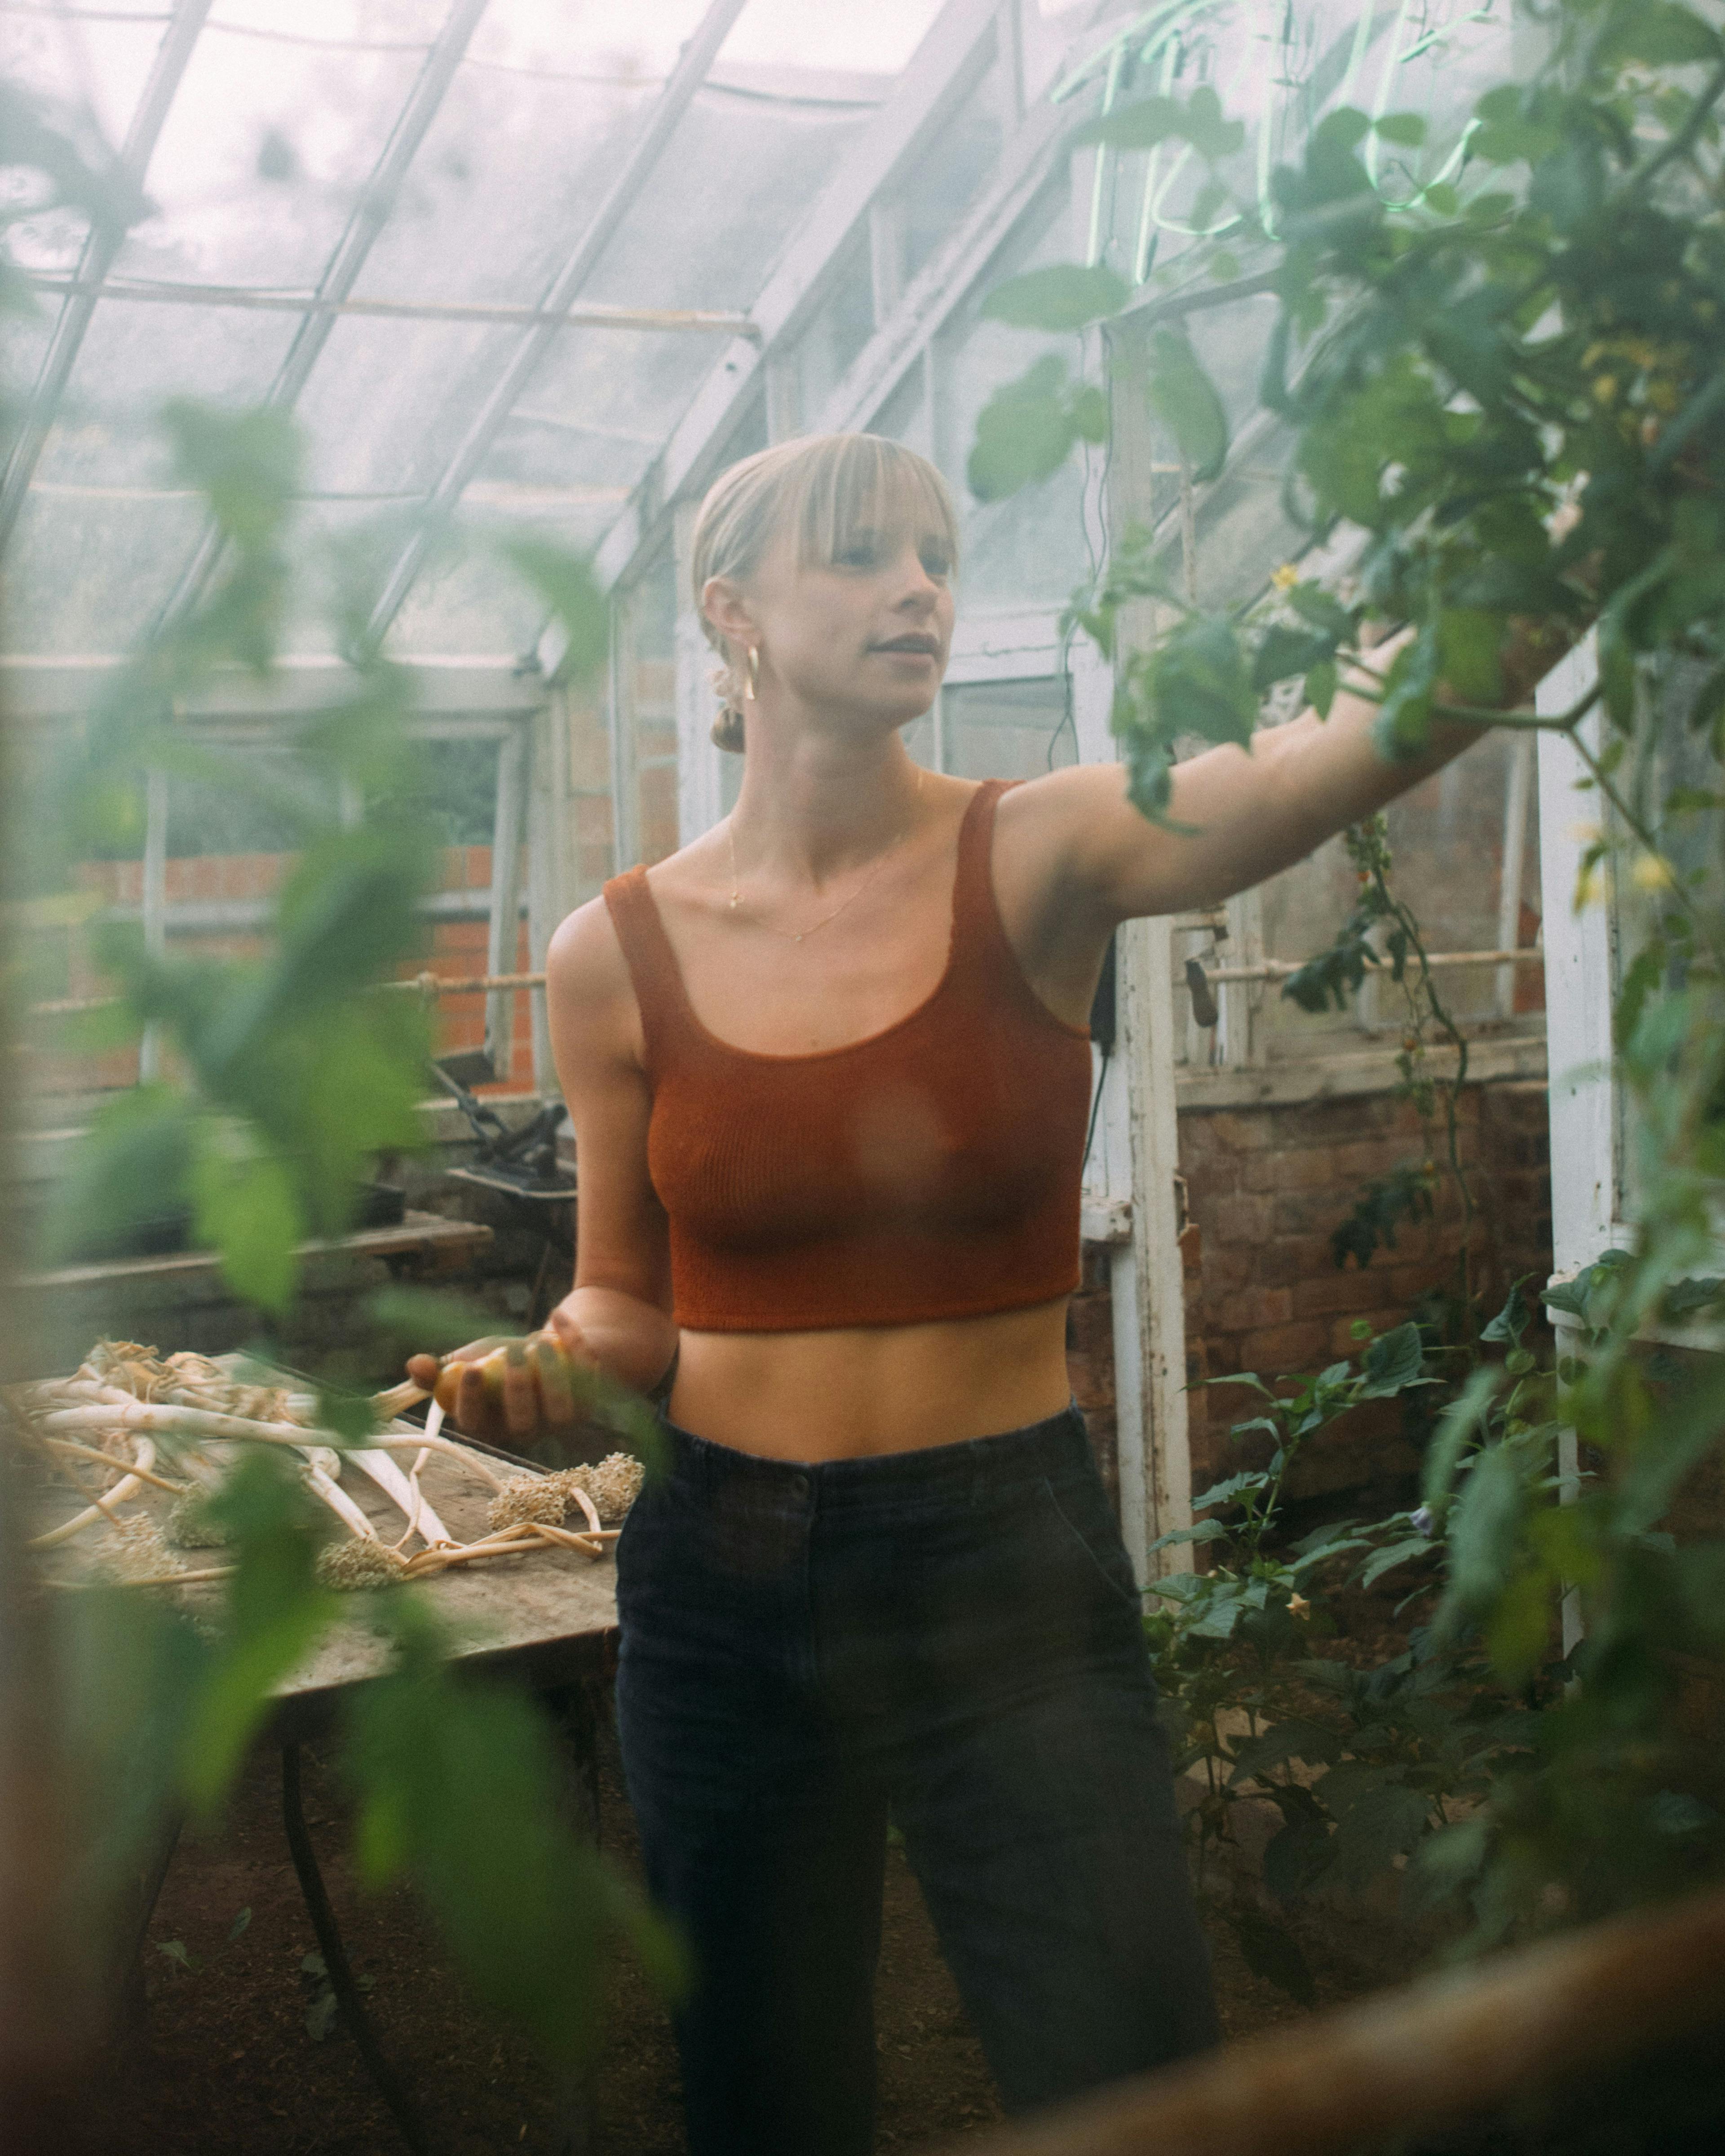 Xanthe in greenhouse picking fruit in bikini top and jeans